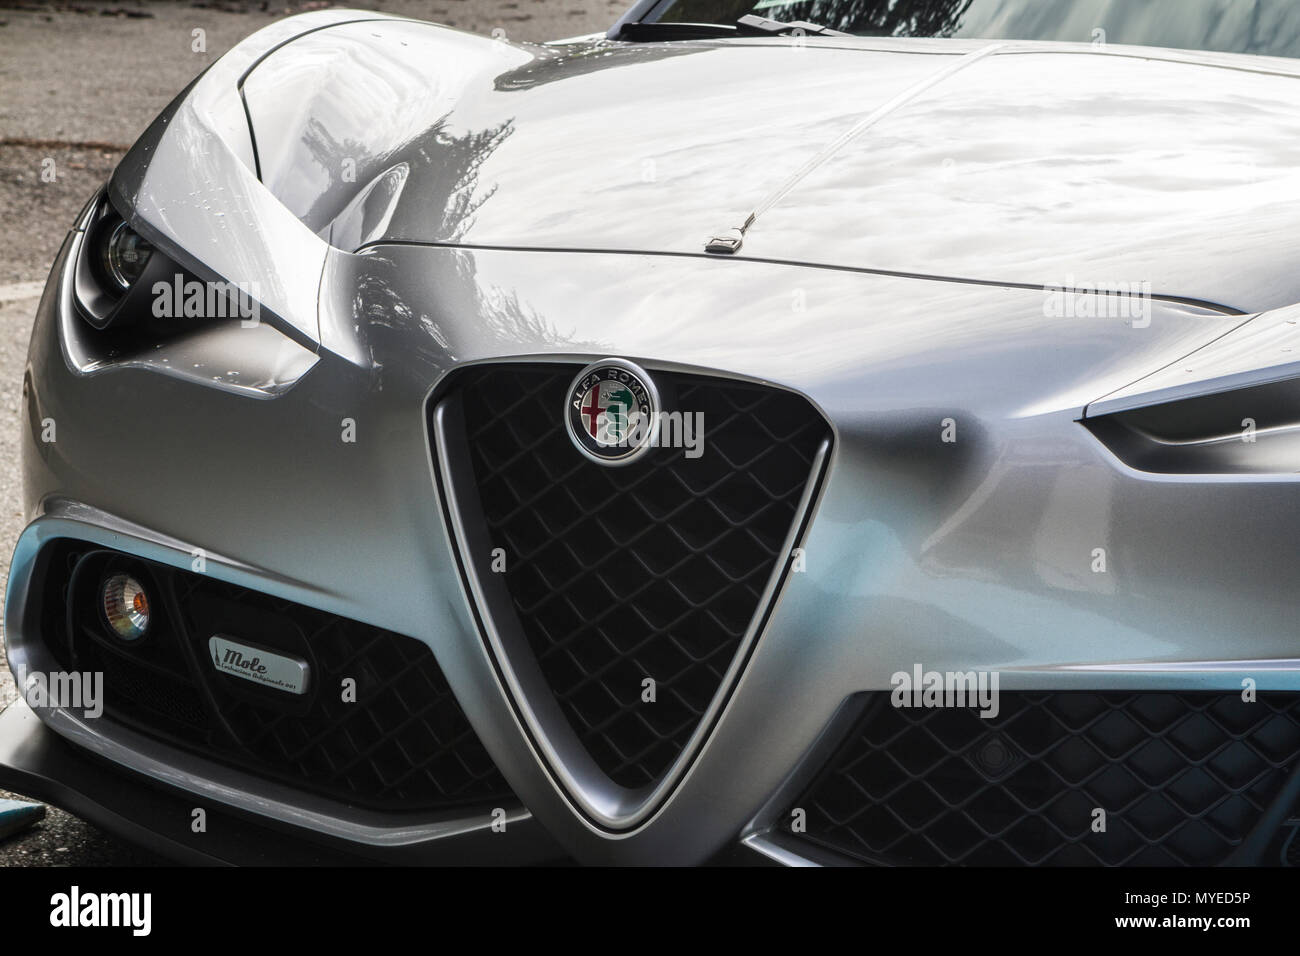 Torino, Italy. 7th June 2018. Detail of Alfa Romeo 4C by Mole Costruzione Artigianale. 2018 edition of Parco Valentino car show hosts cars by many automobile manufacturers and car designers inside Valentino Park in Torino, Italy Credit: Marco Destefanis/Alamy Live News Stock Photo